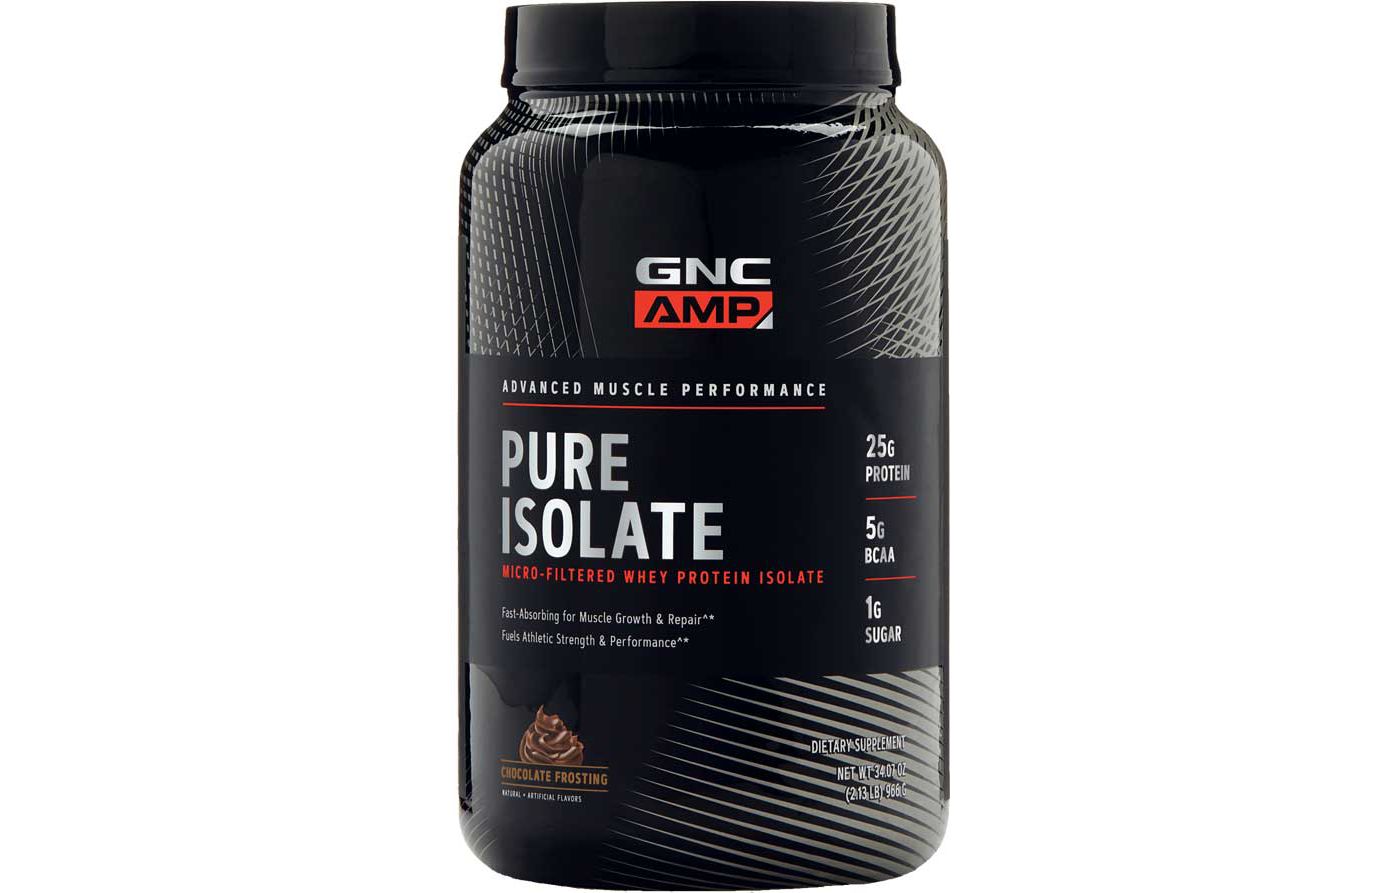 GNC Amp Pure Isolate Protein Chocolate Frosting 1.95lbs ...